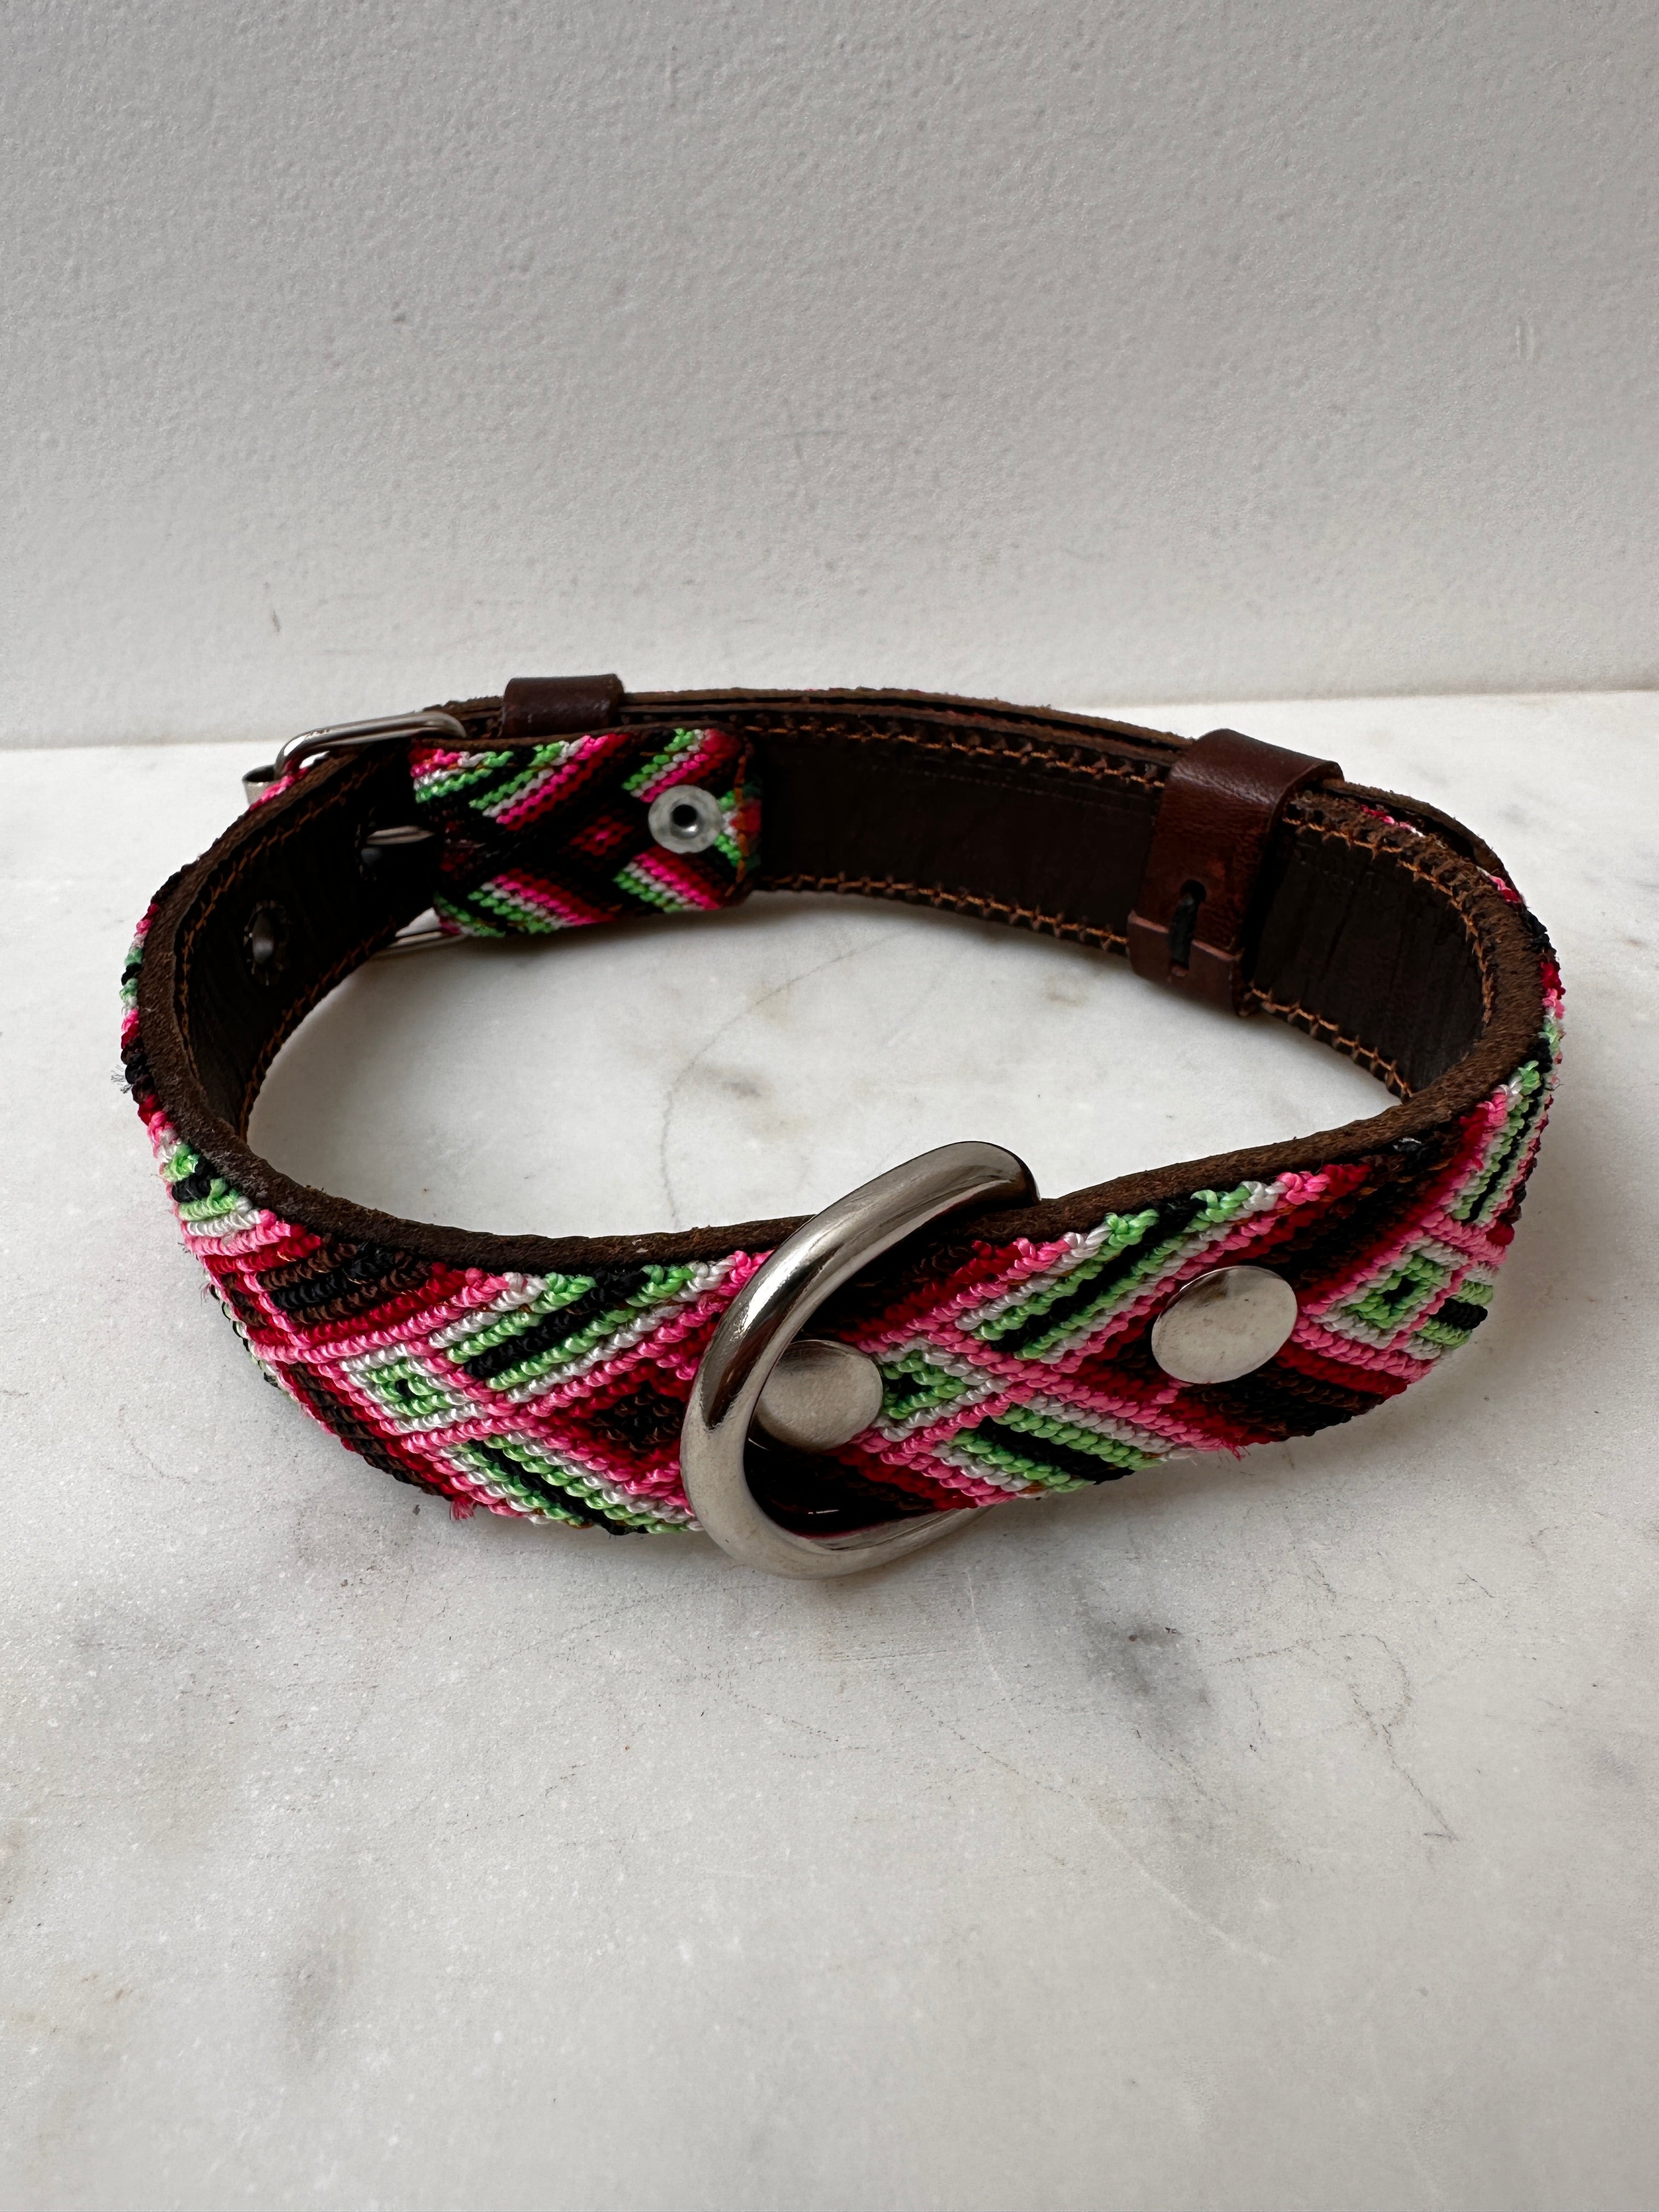 Future Nomads Homewares One Size Huichol Fully Embroidered Dog Collar M3